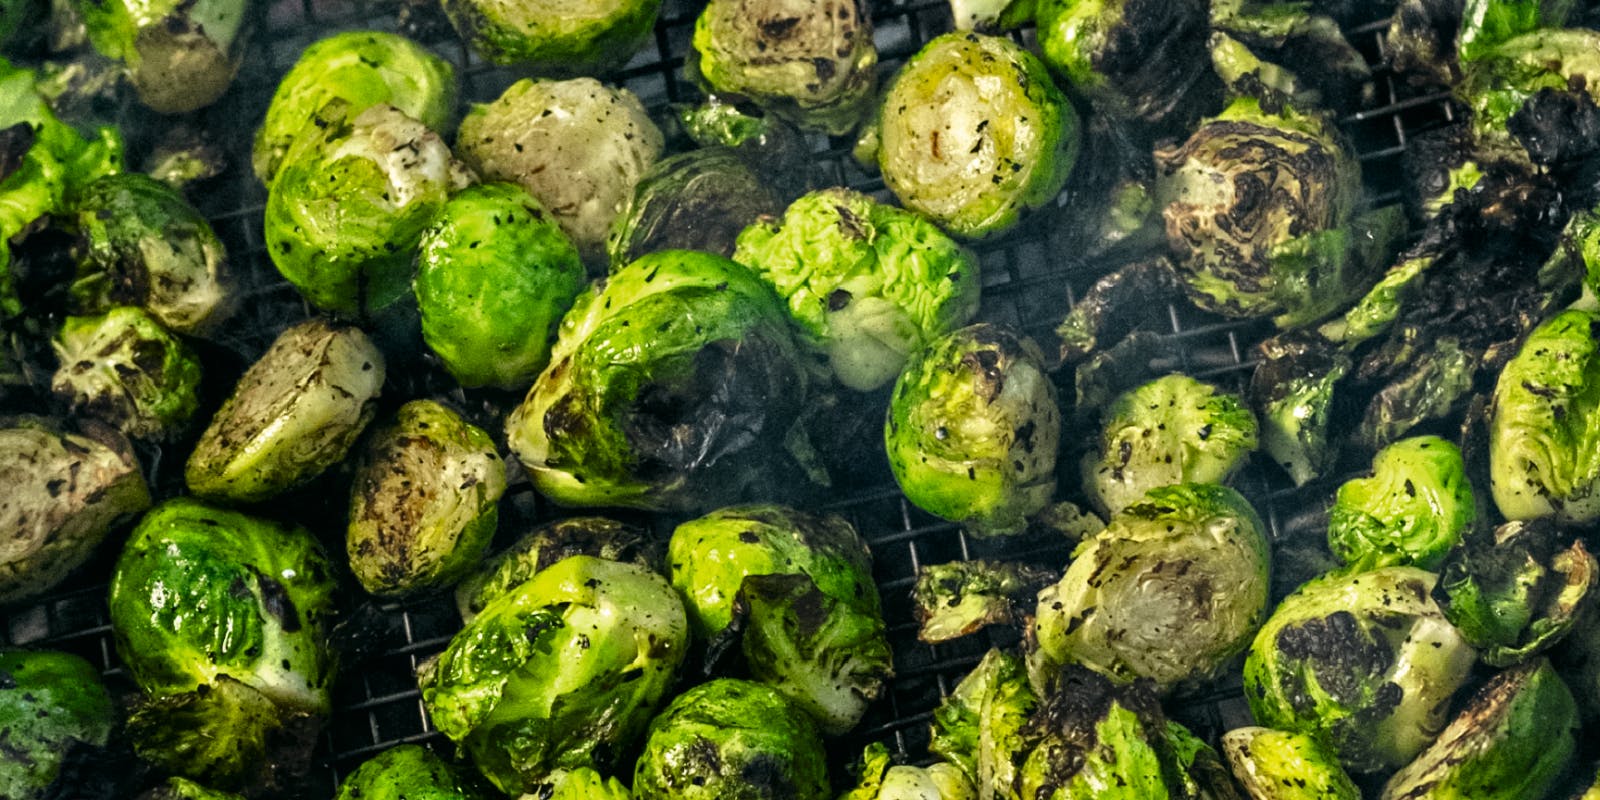 Fire-kissed brussels sprouts